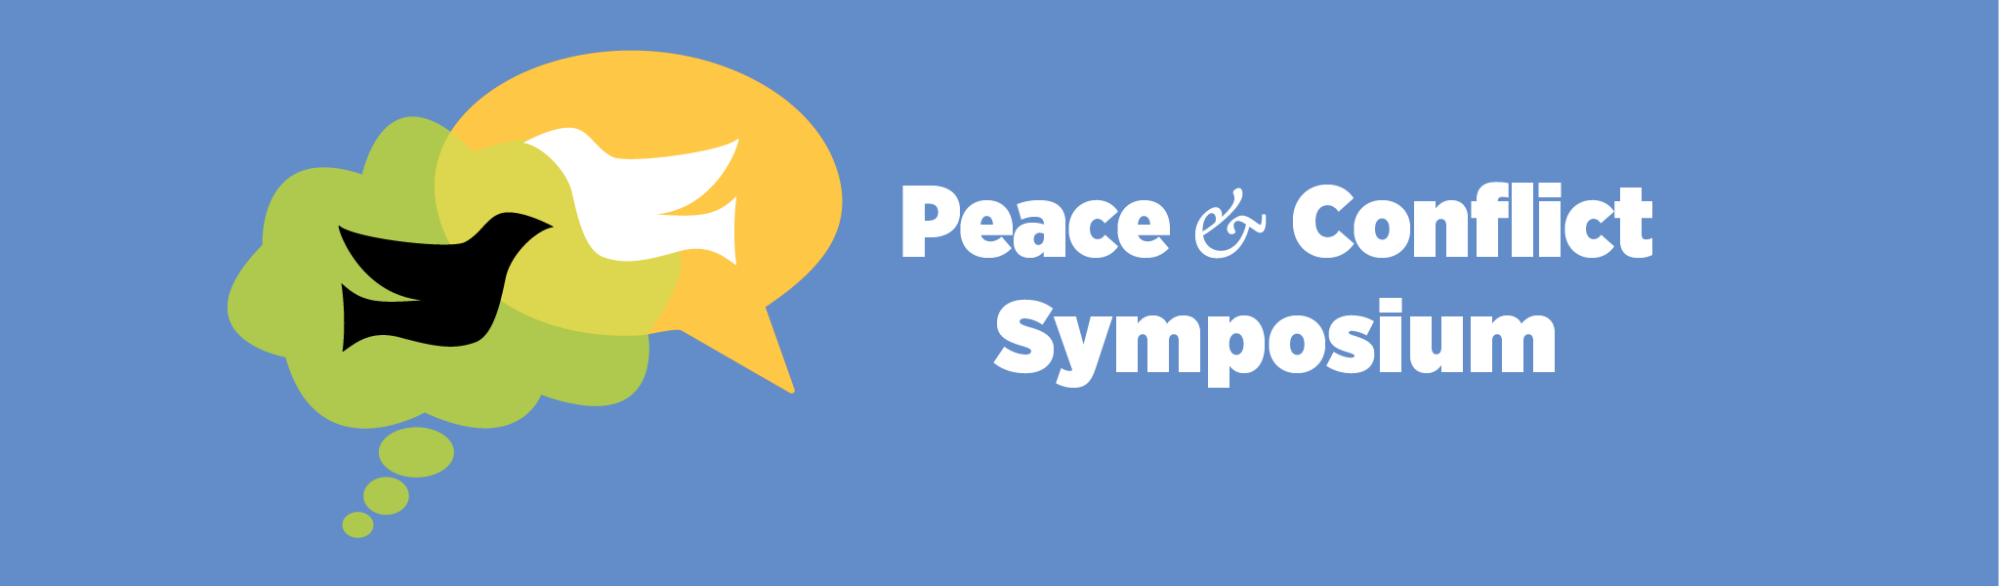 PEACE & CONFLICT SYMPOSIUMS Center for Peace and Conflict Studies